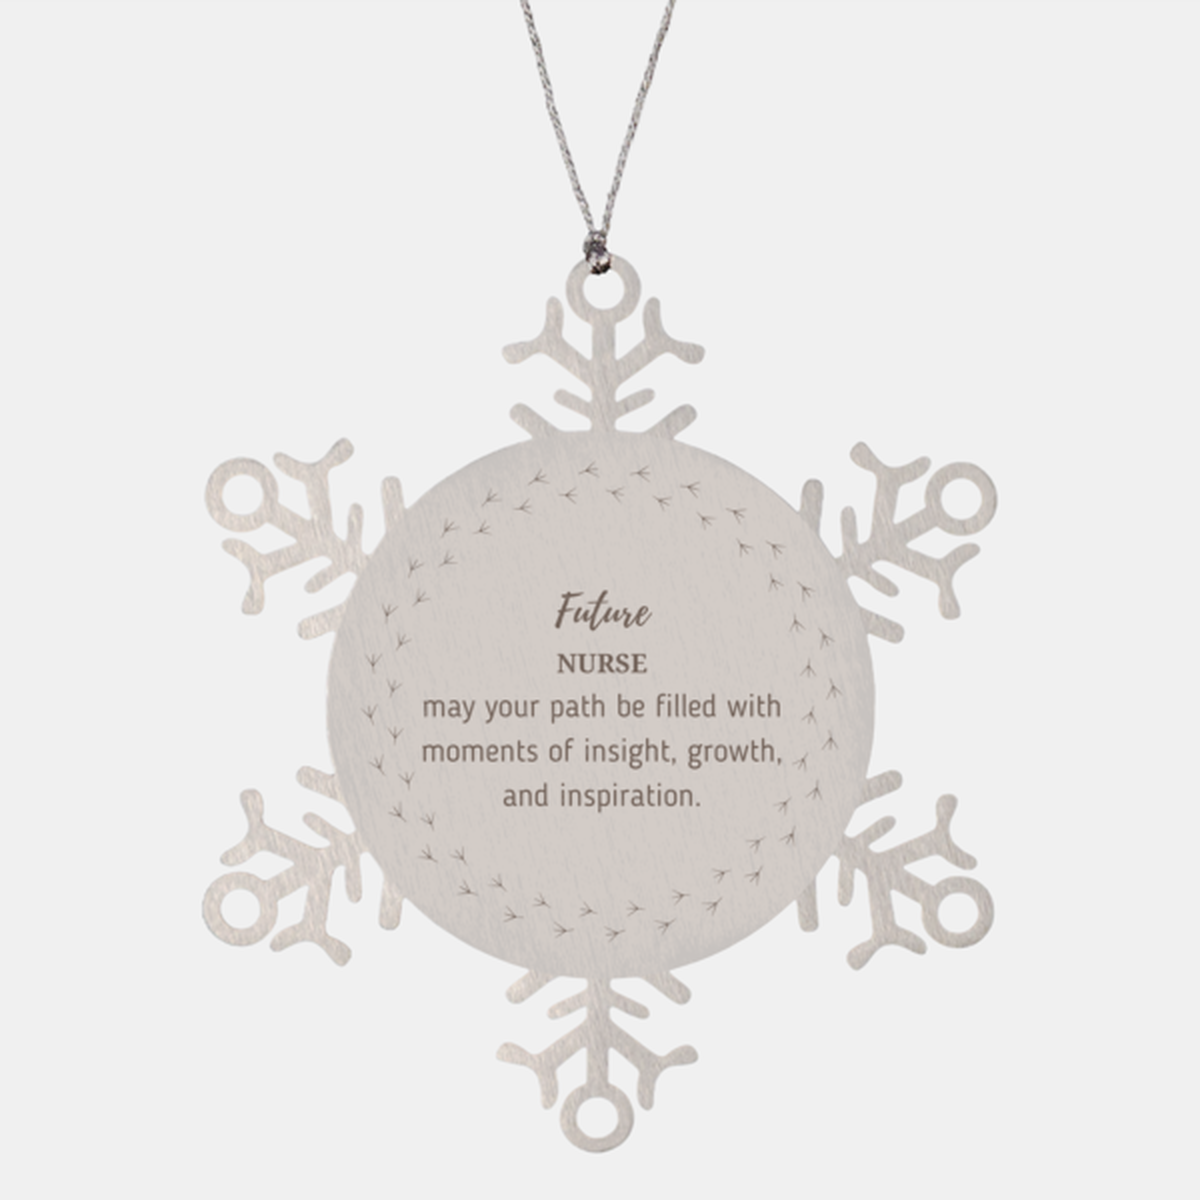 Future Nurse Gifts, May your path be filled with moments of insight, Graduation Gifts for New Nurse, Christmas Unique Snowflake Ornament For Men, Women, Friends